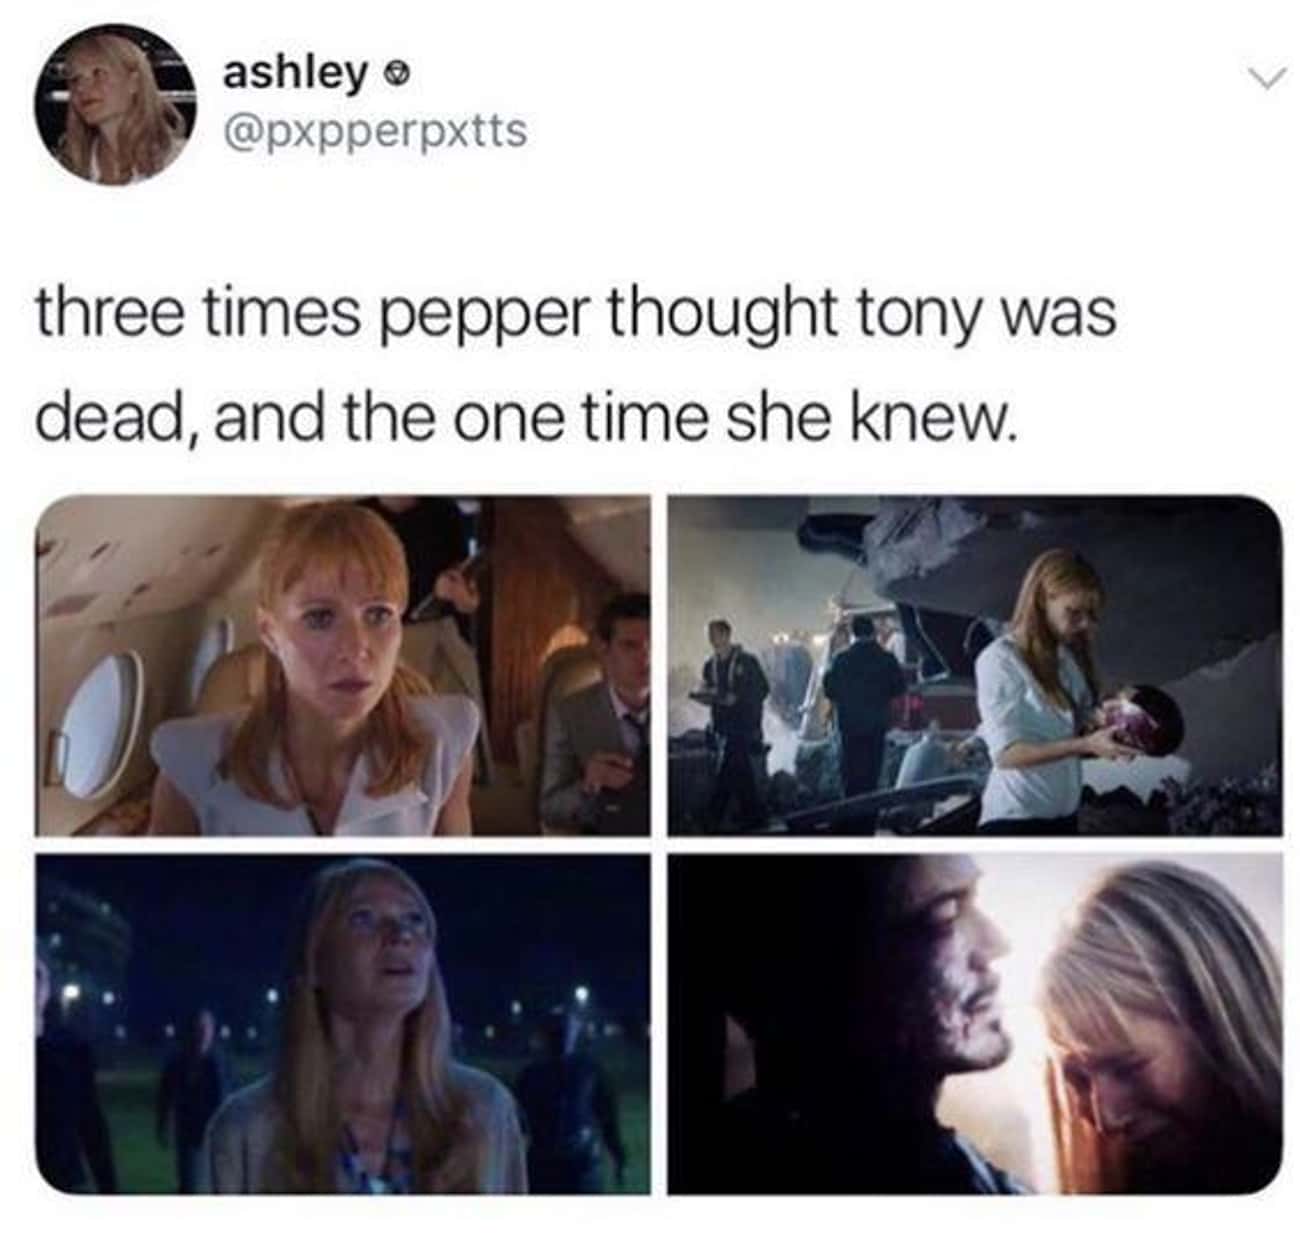 The one time Pepper knew